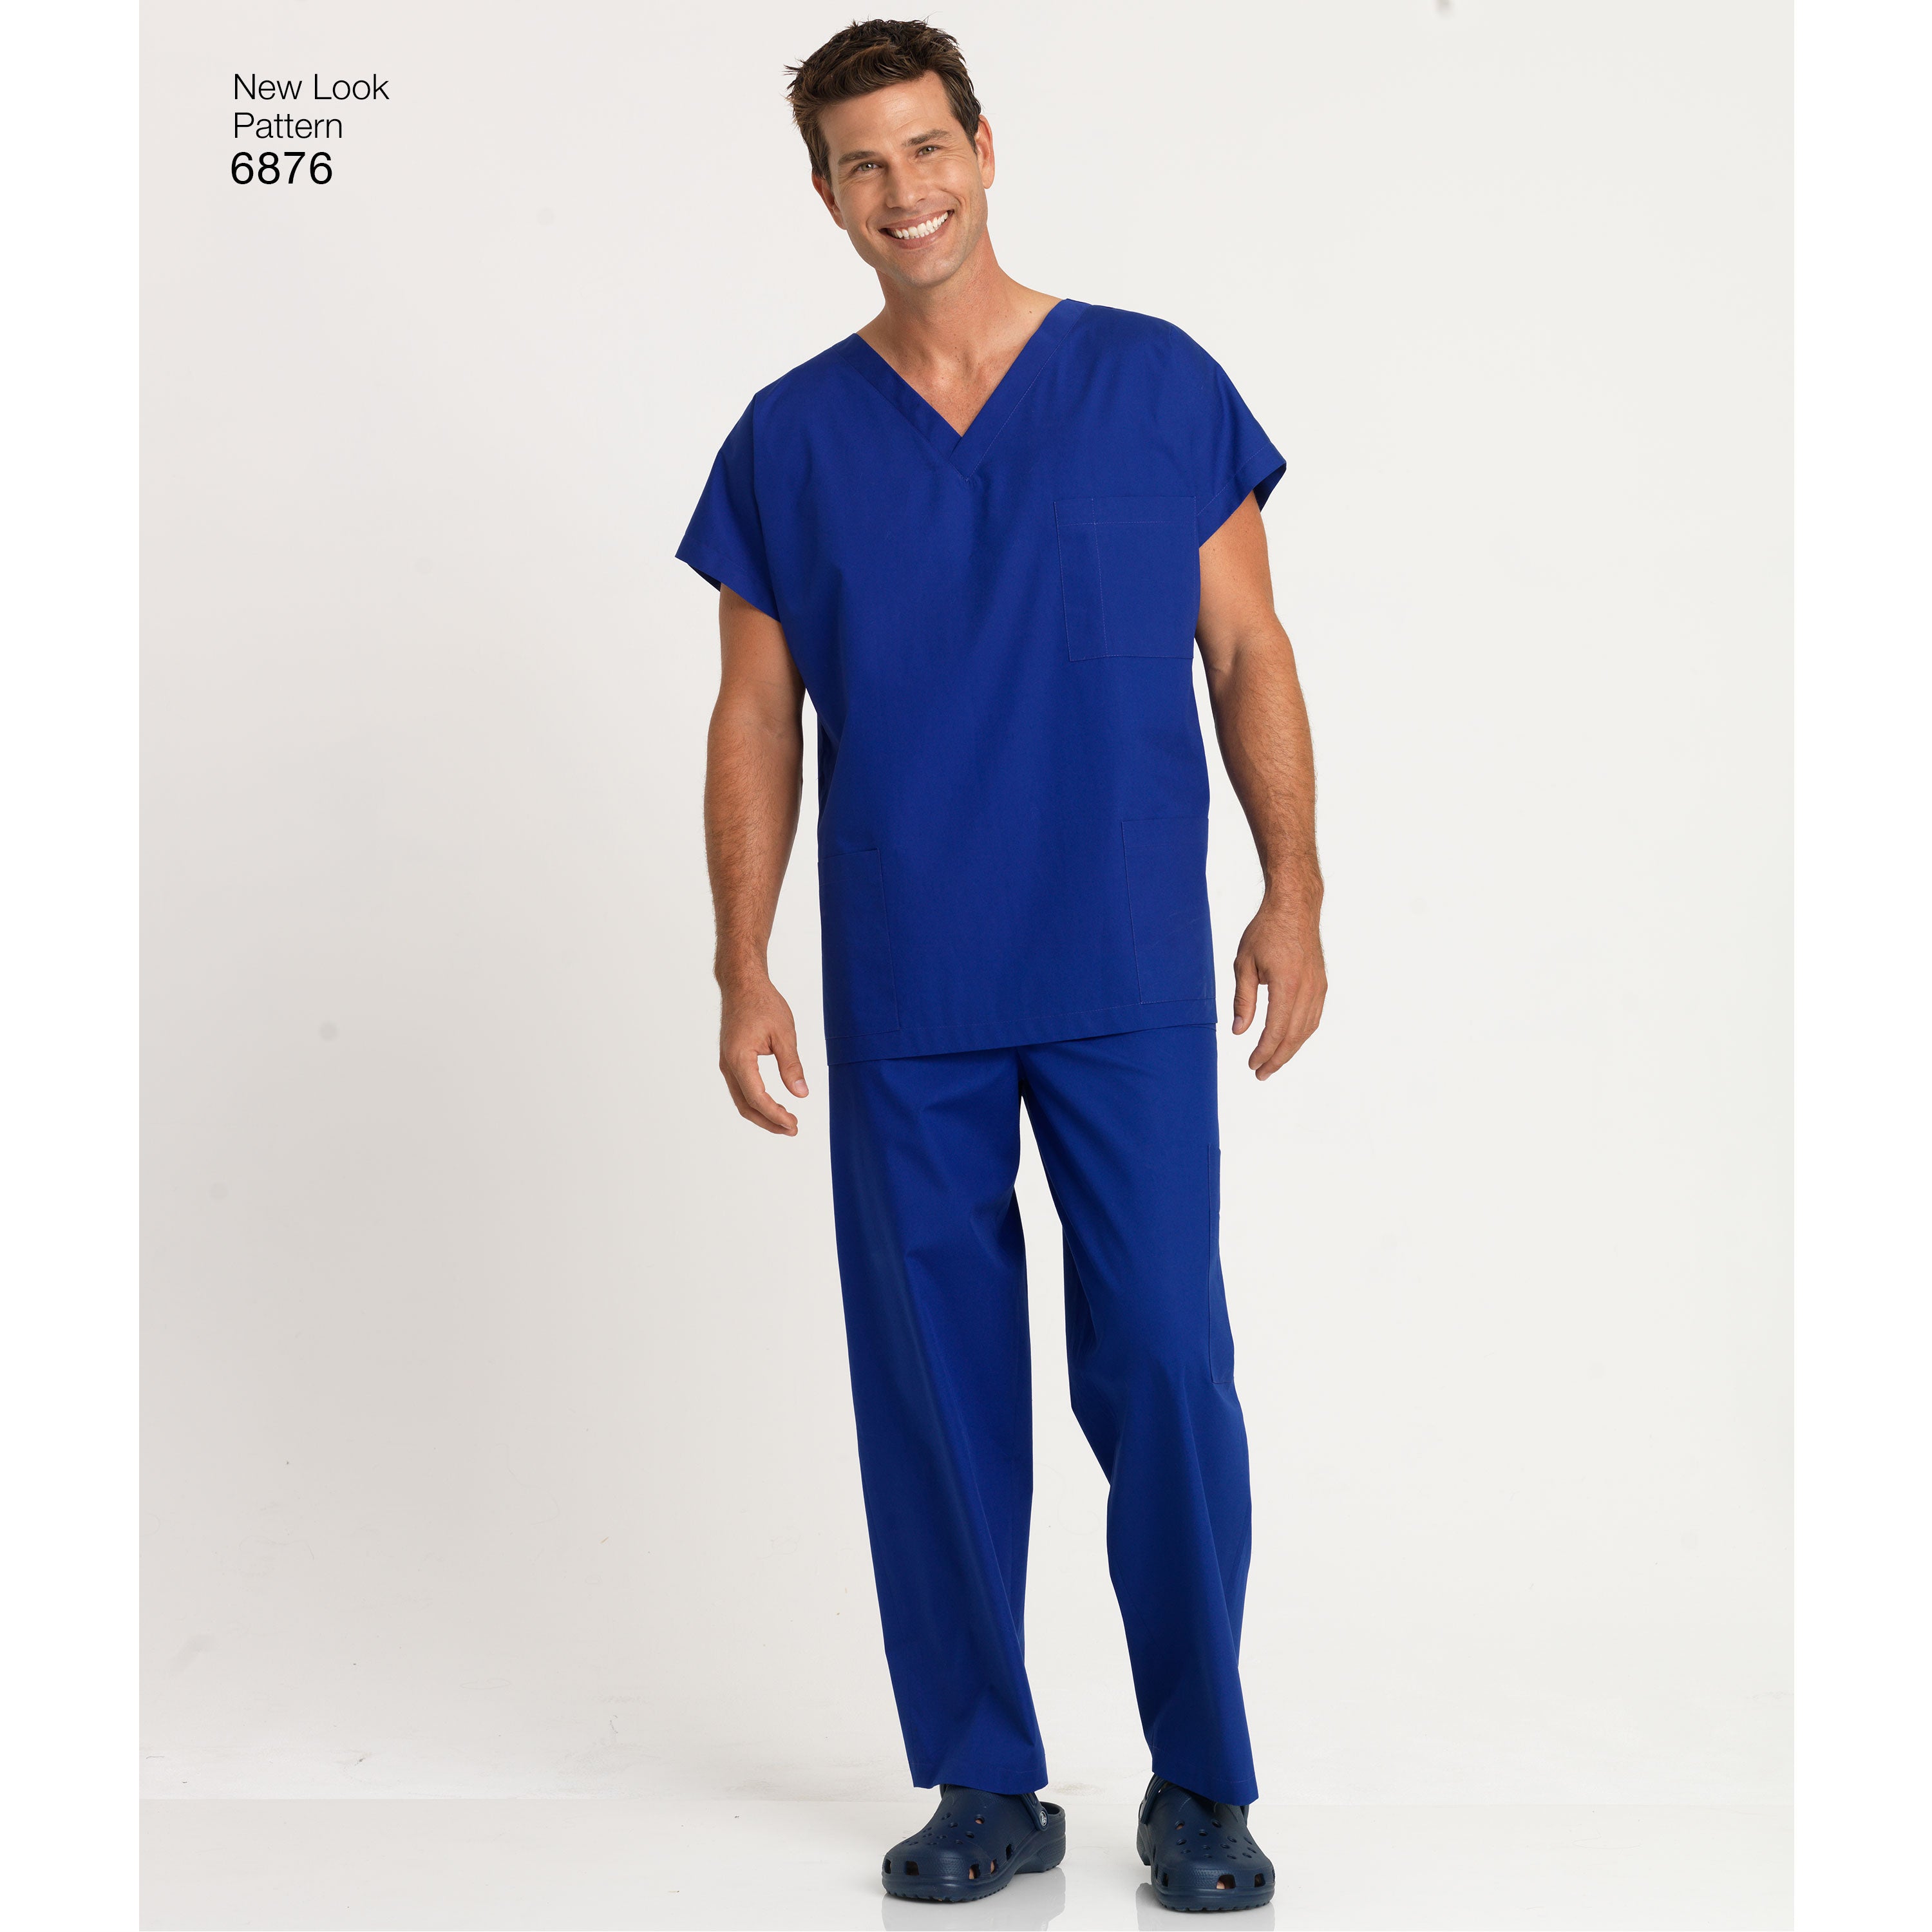 NL6876 Misses' and Mens' Scrubs Sewing Pattern from Jaycotts Sewing Supplies